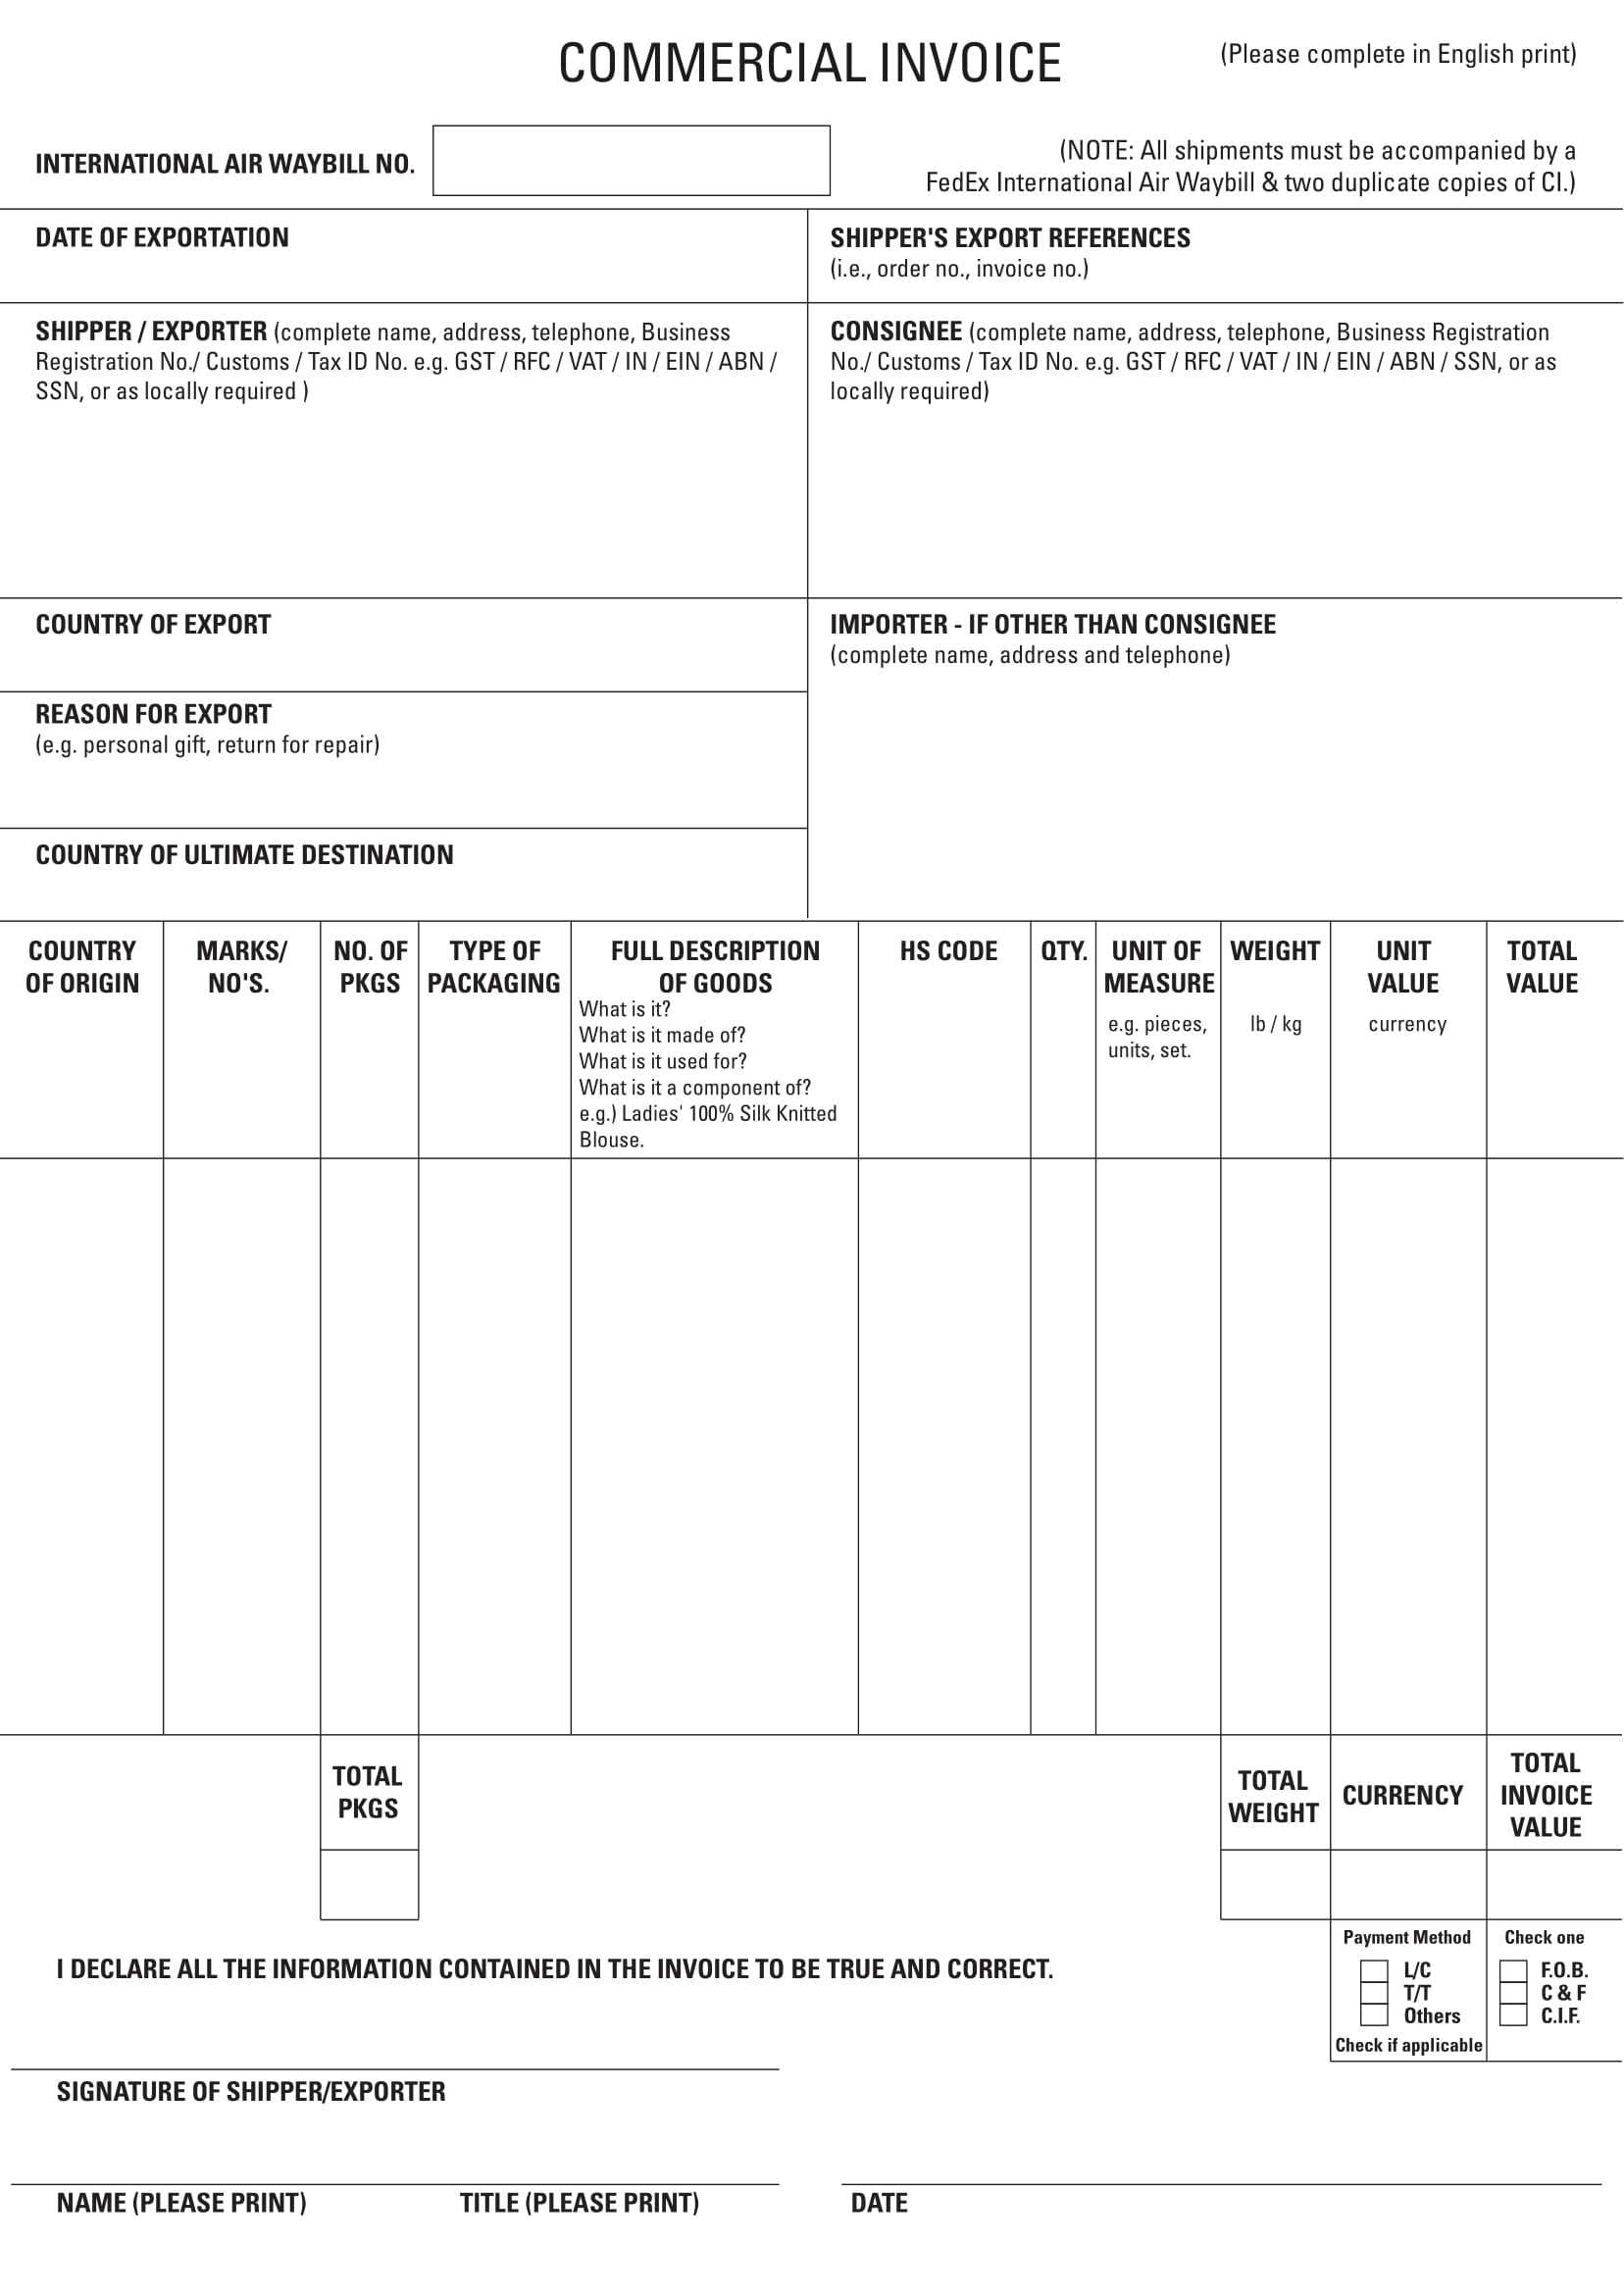 7+ Commercial Invoice Examples - Pdf | Examples With Regard To Commercial Invoice Template Word Doc